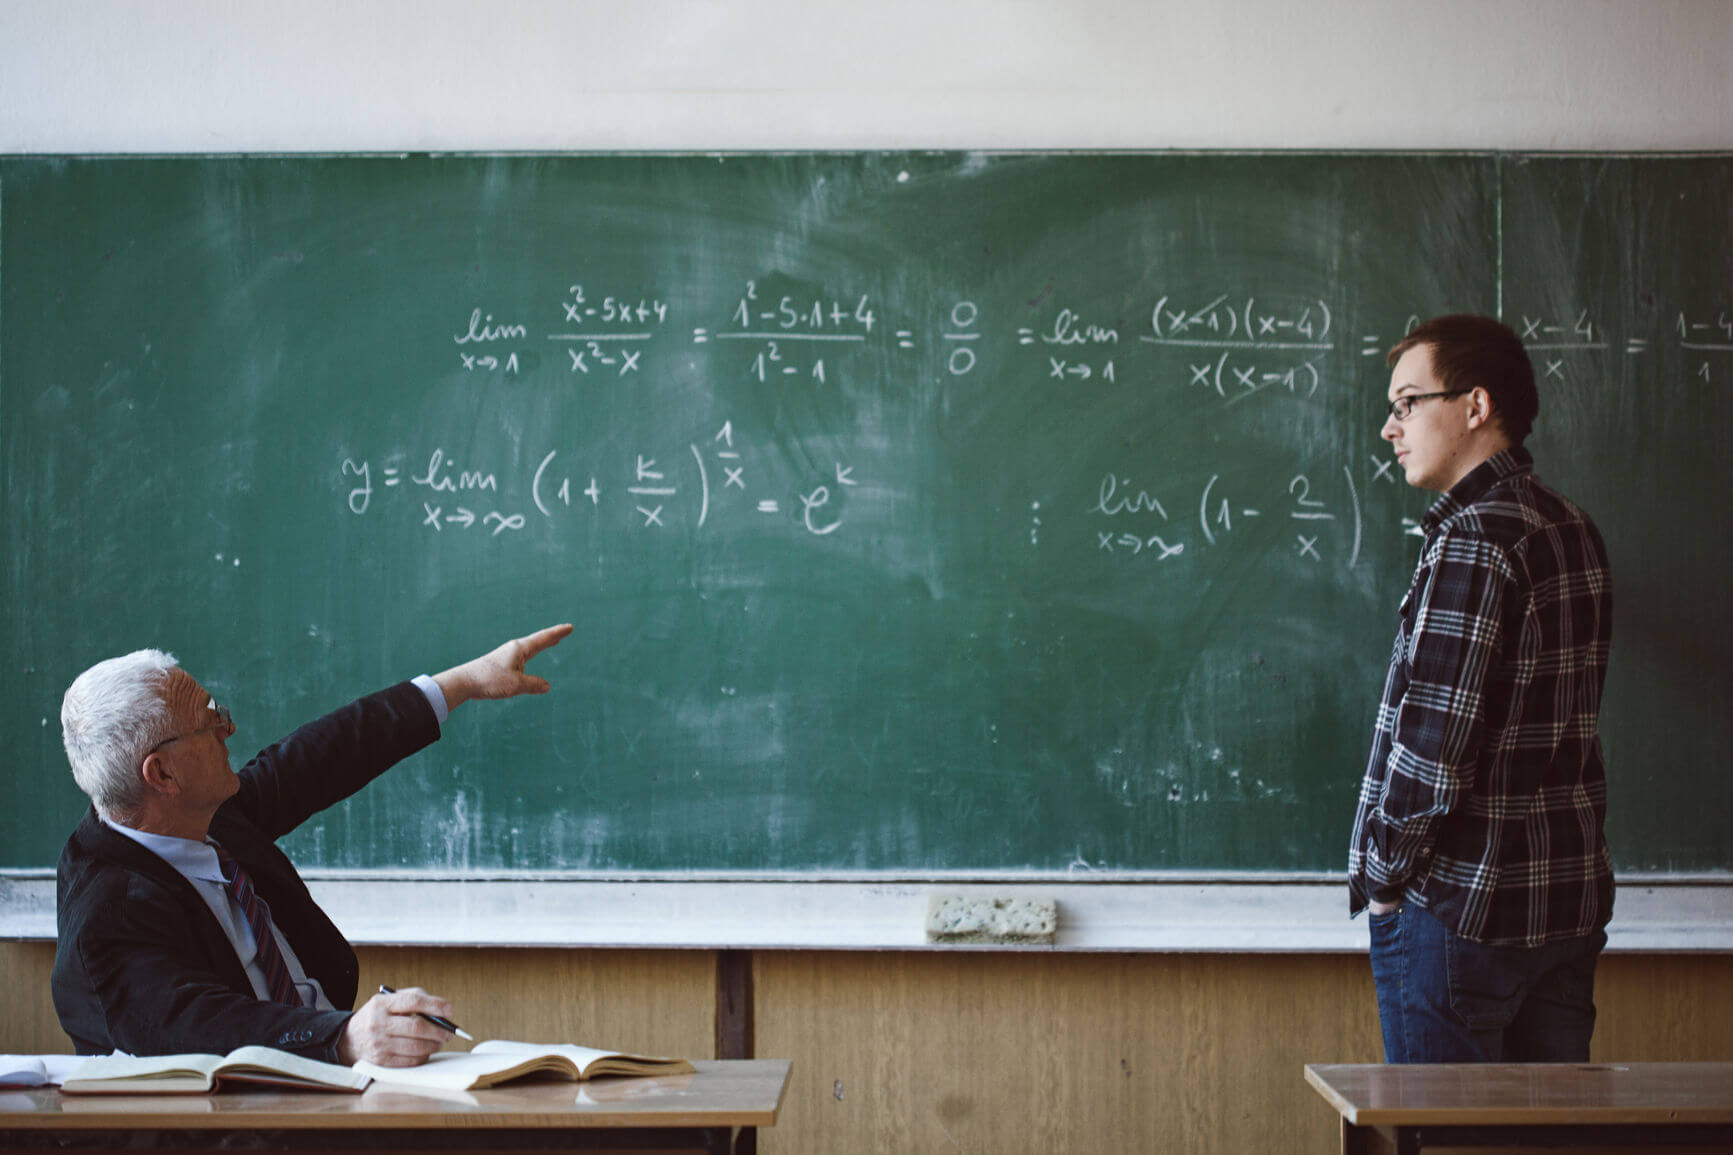 Teacher and student discussing in front of chalkboard.